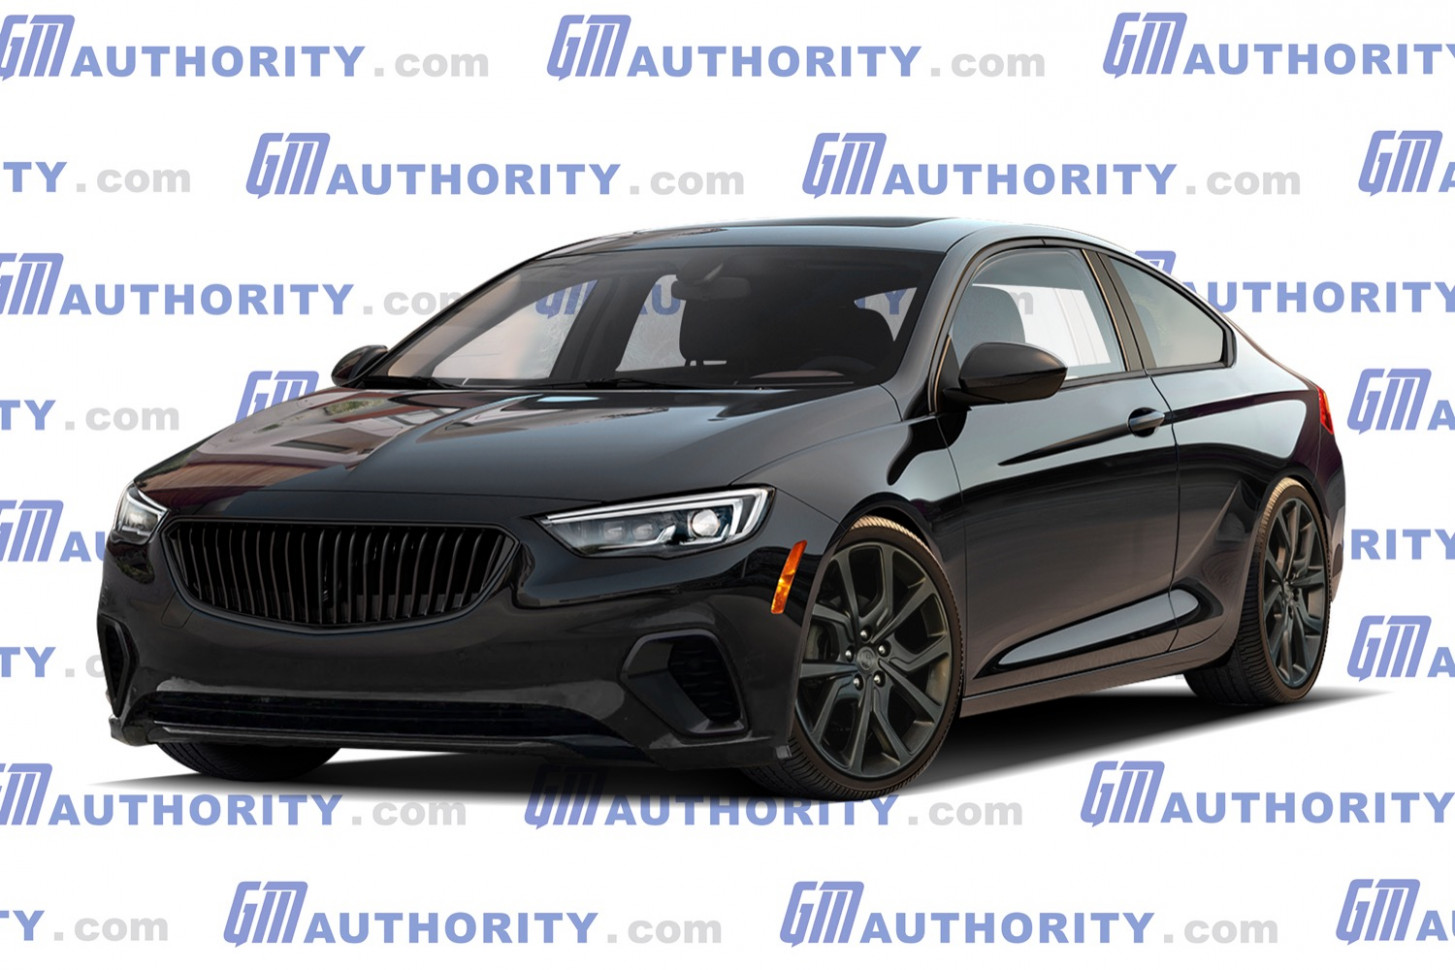 Release 2022 Buick Grand National Gnx